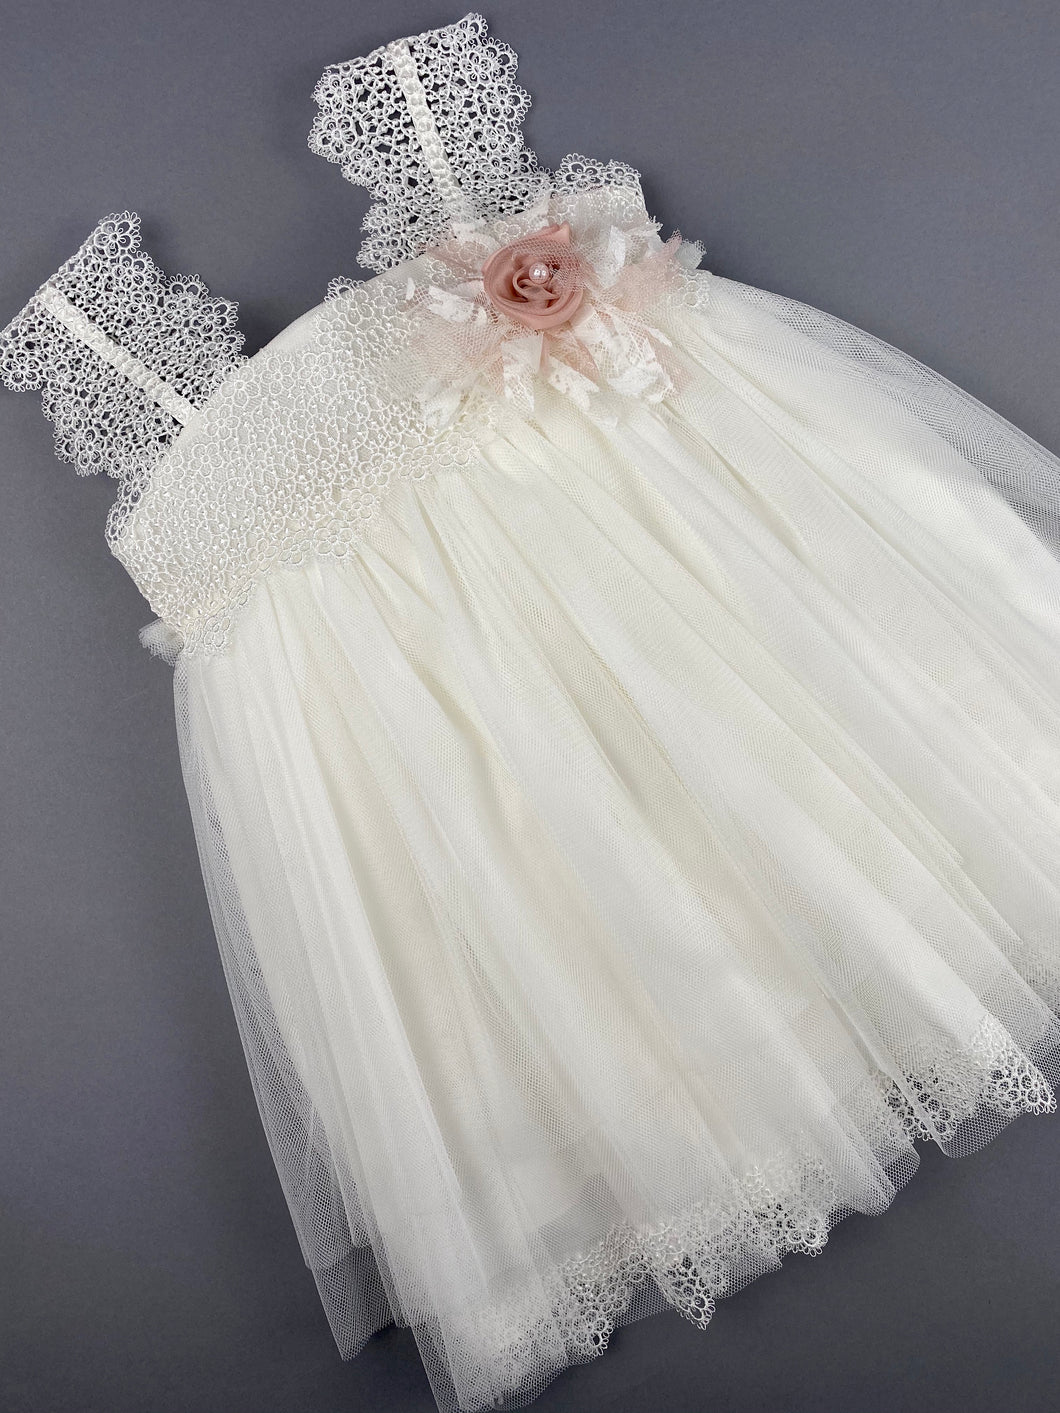 Dress 20 Girls Baptismal Christening Sleeveless  3pc Dress with matching Bolero and Hat. Made in Greece exclusively for Rosies Collections.